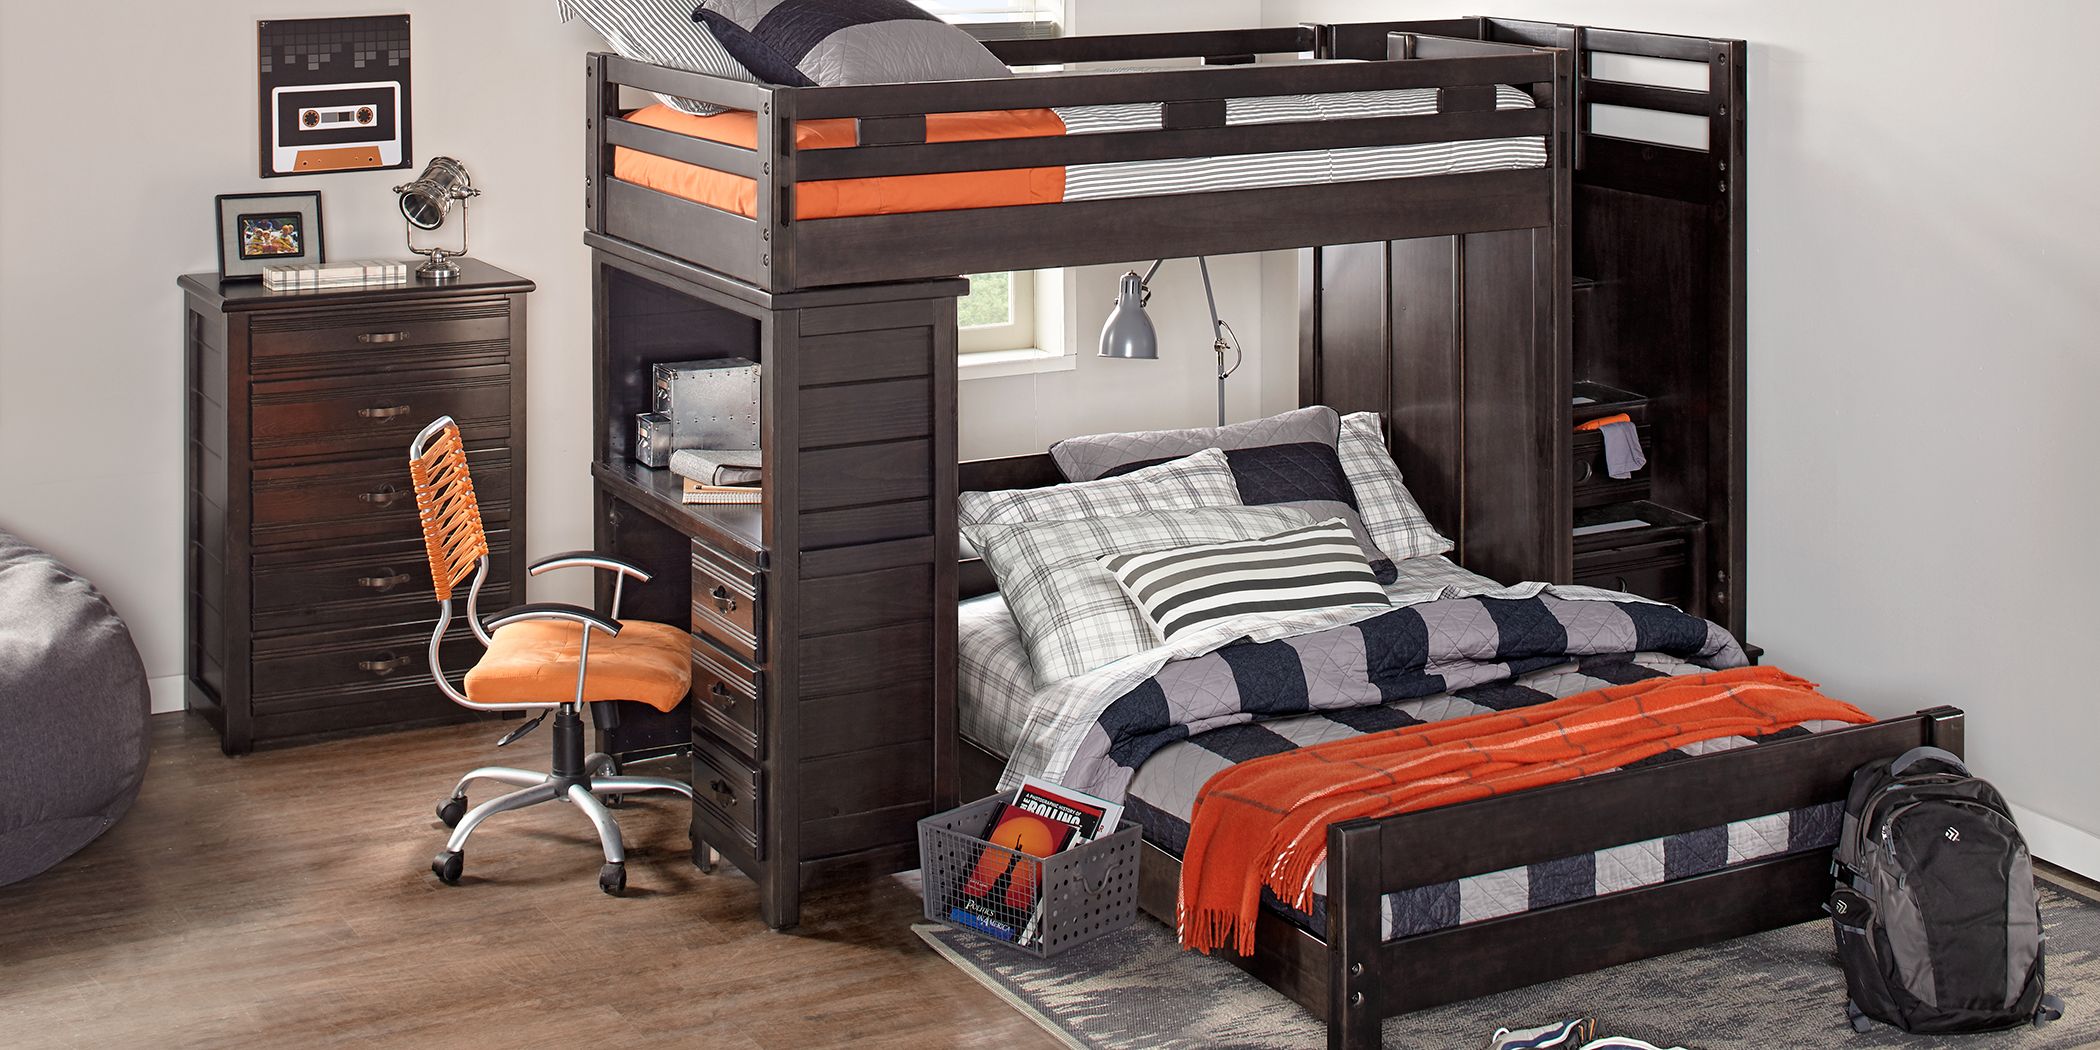 Creekside Charcoal Twin Full Step Bunk, Rooms To Go Loft Bunk Beds